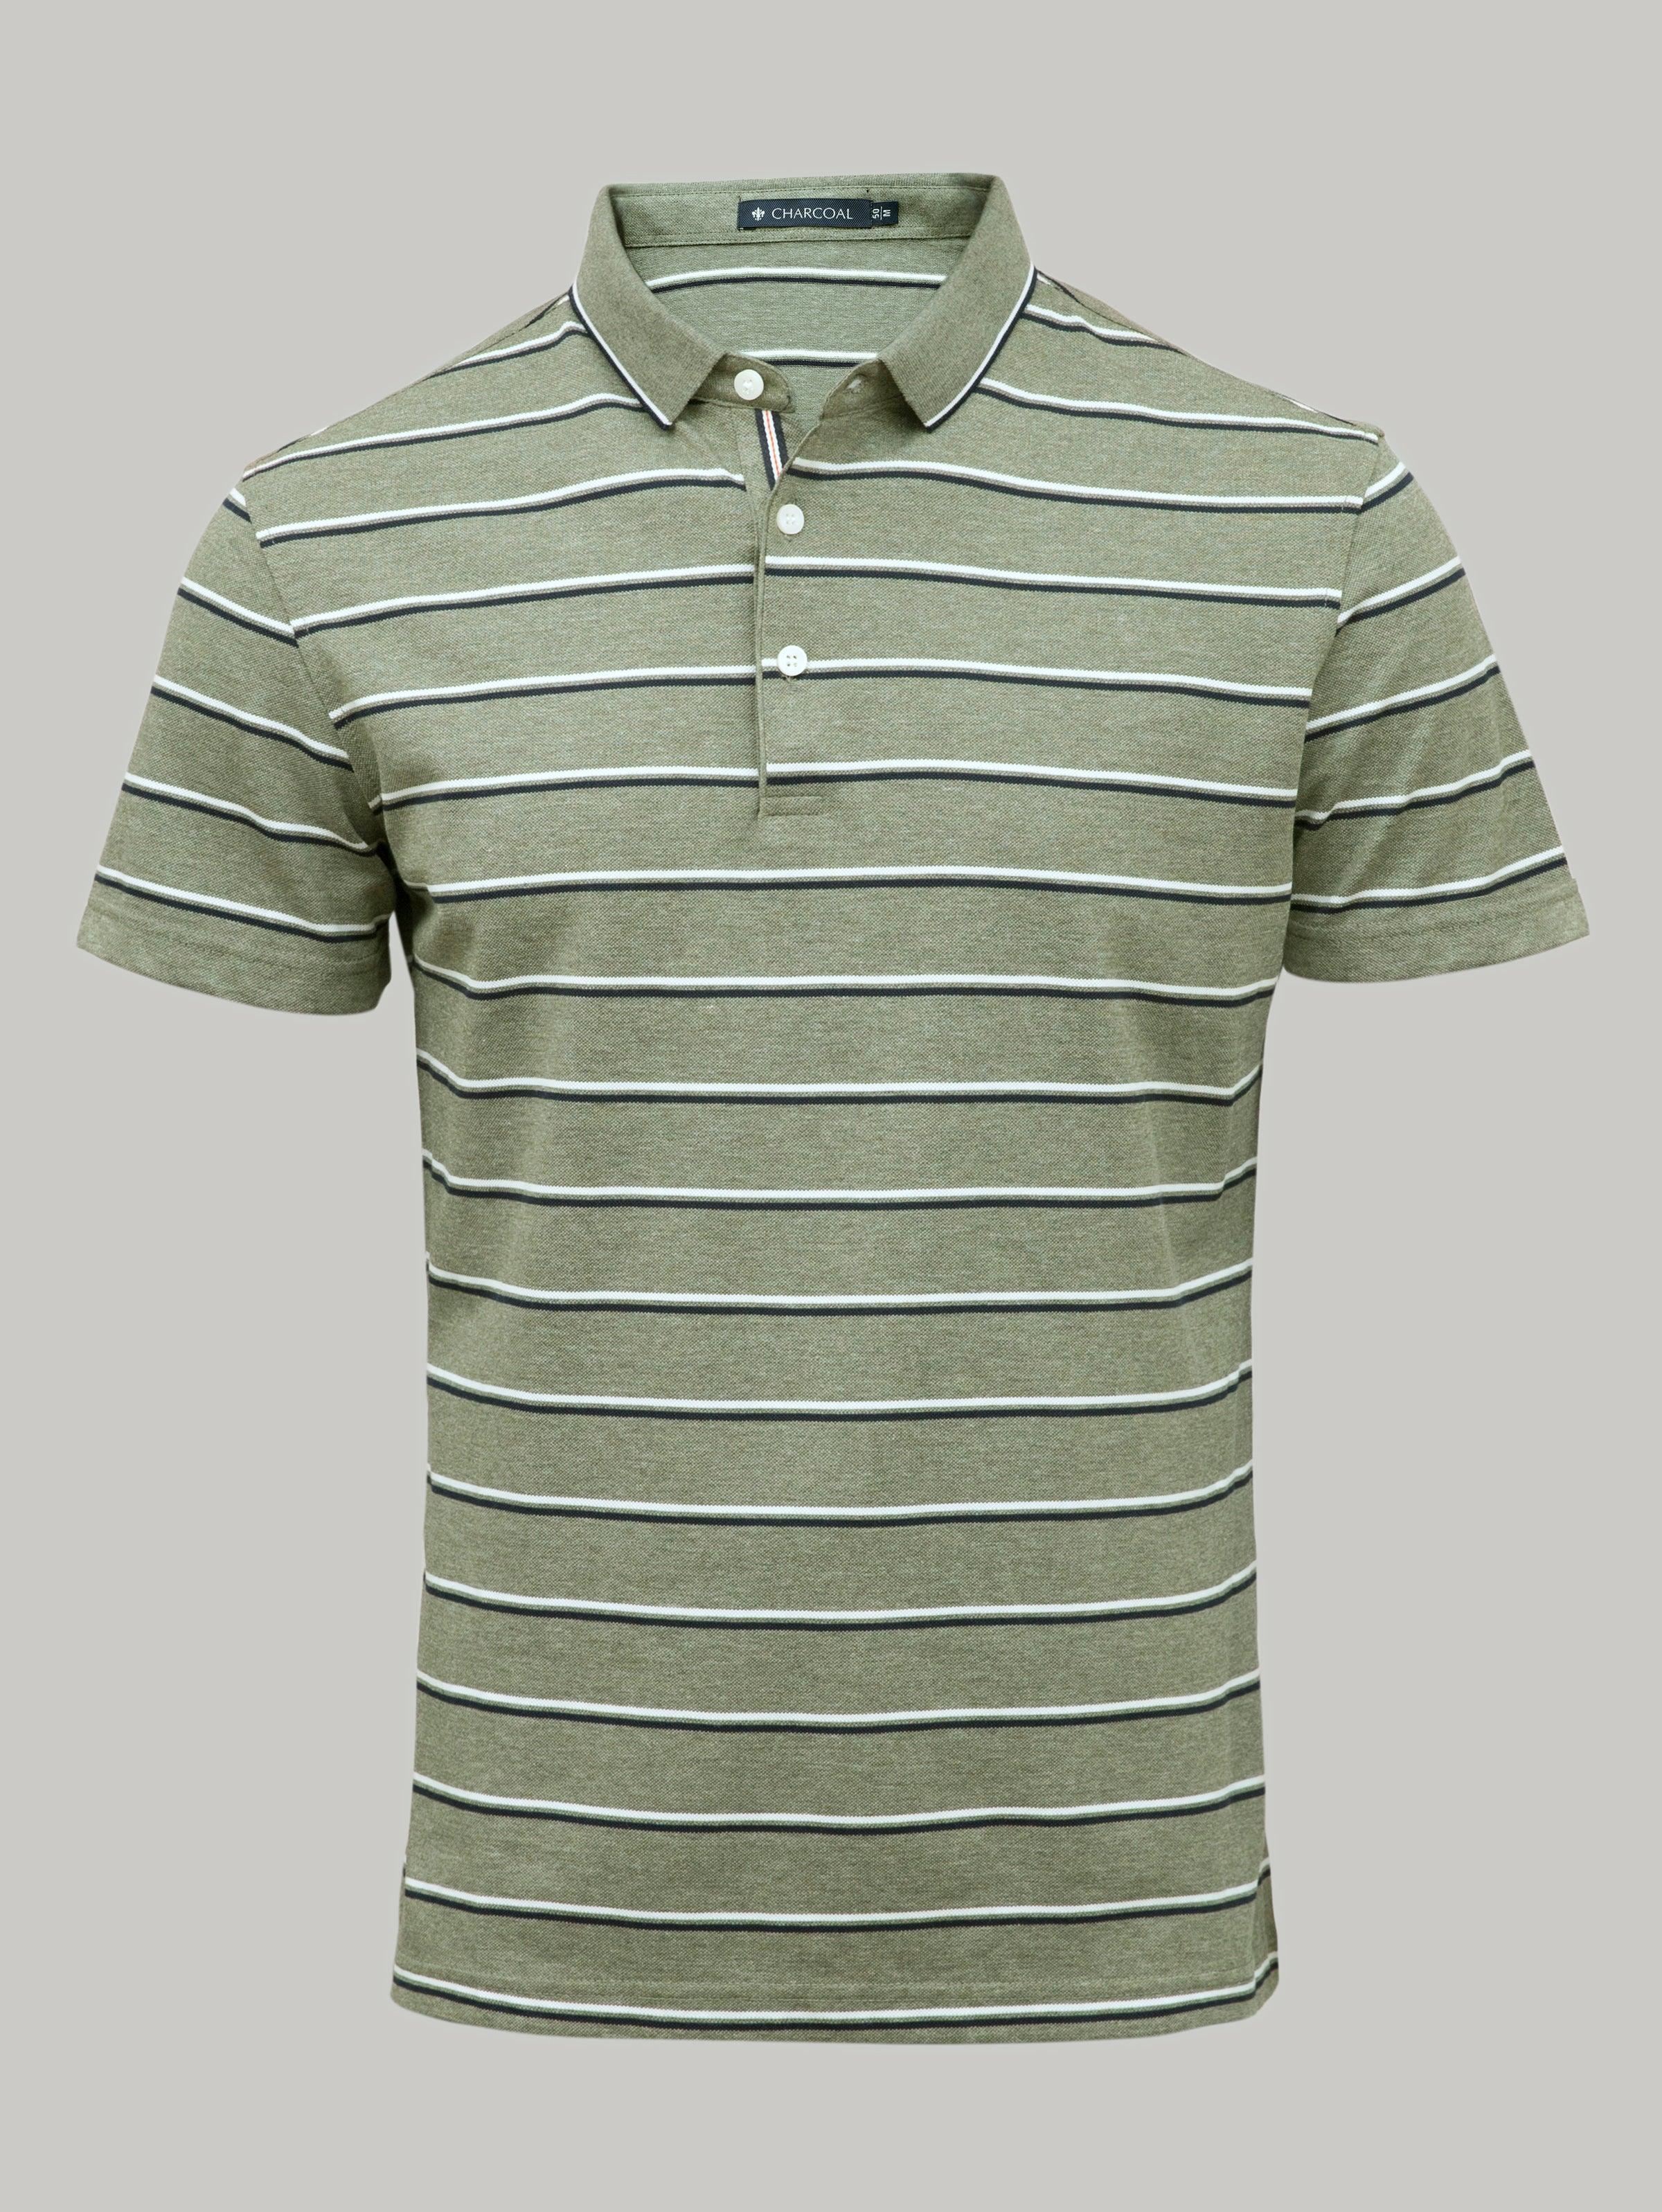 Exclusive T Shirt Polo Green at Charcoal Clothing